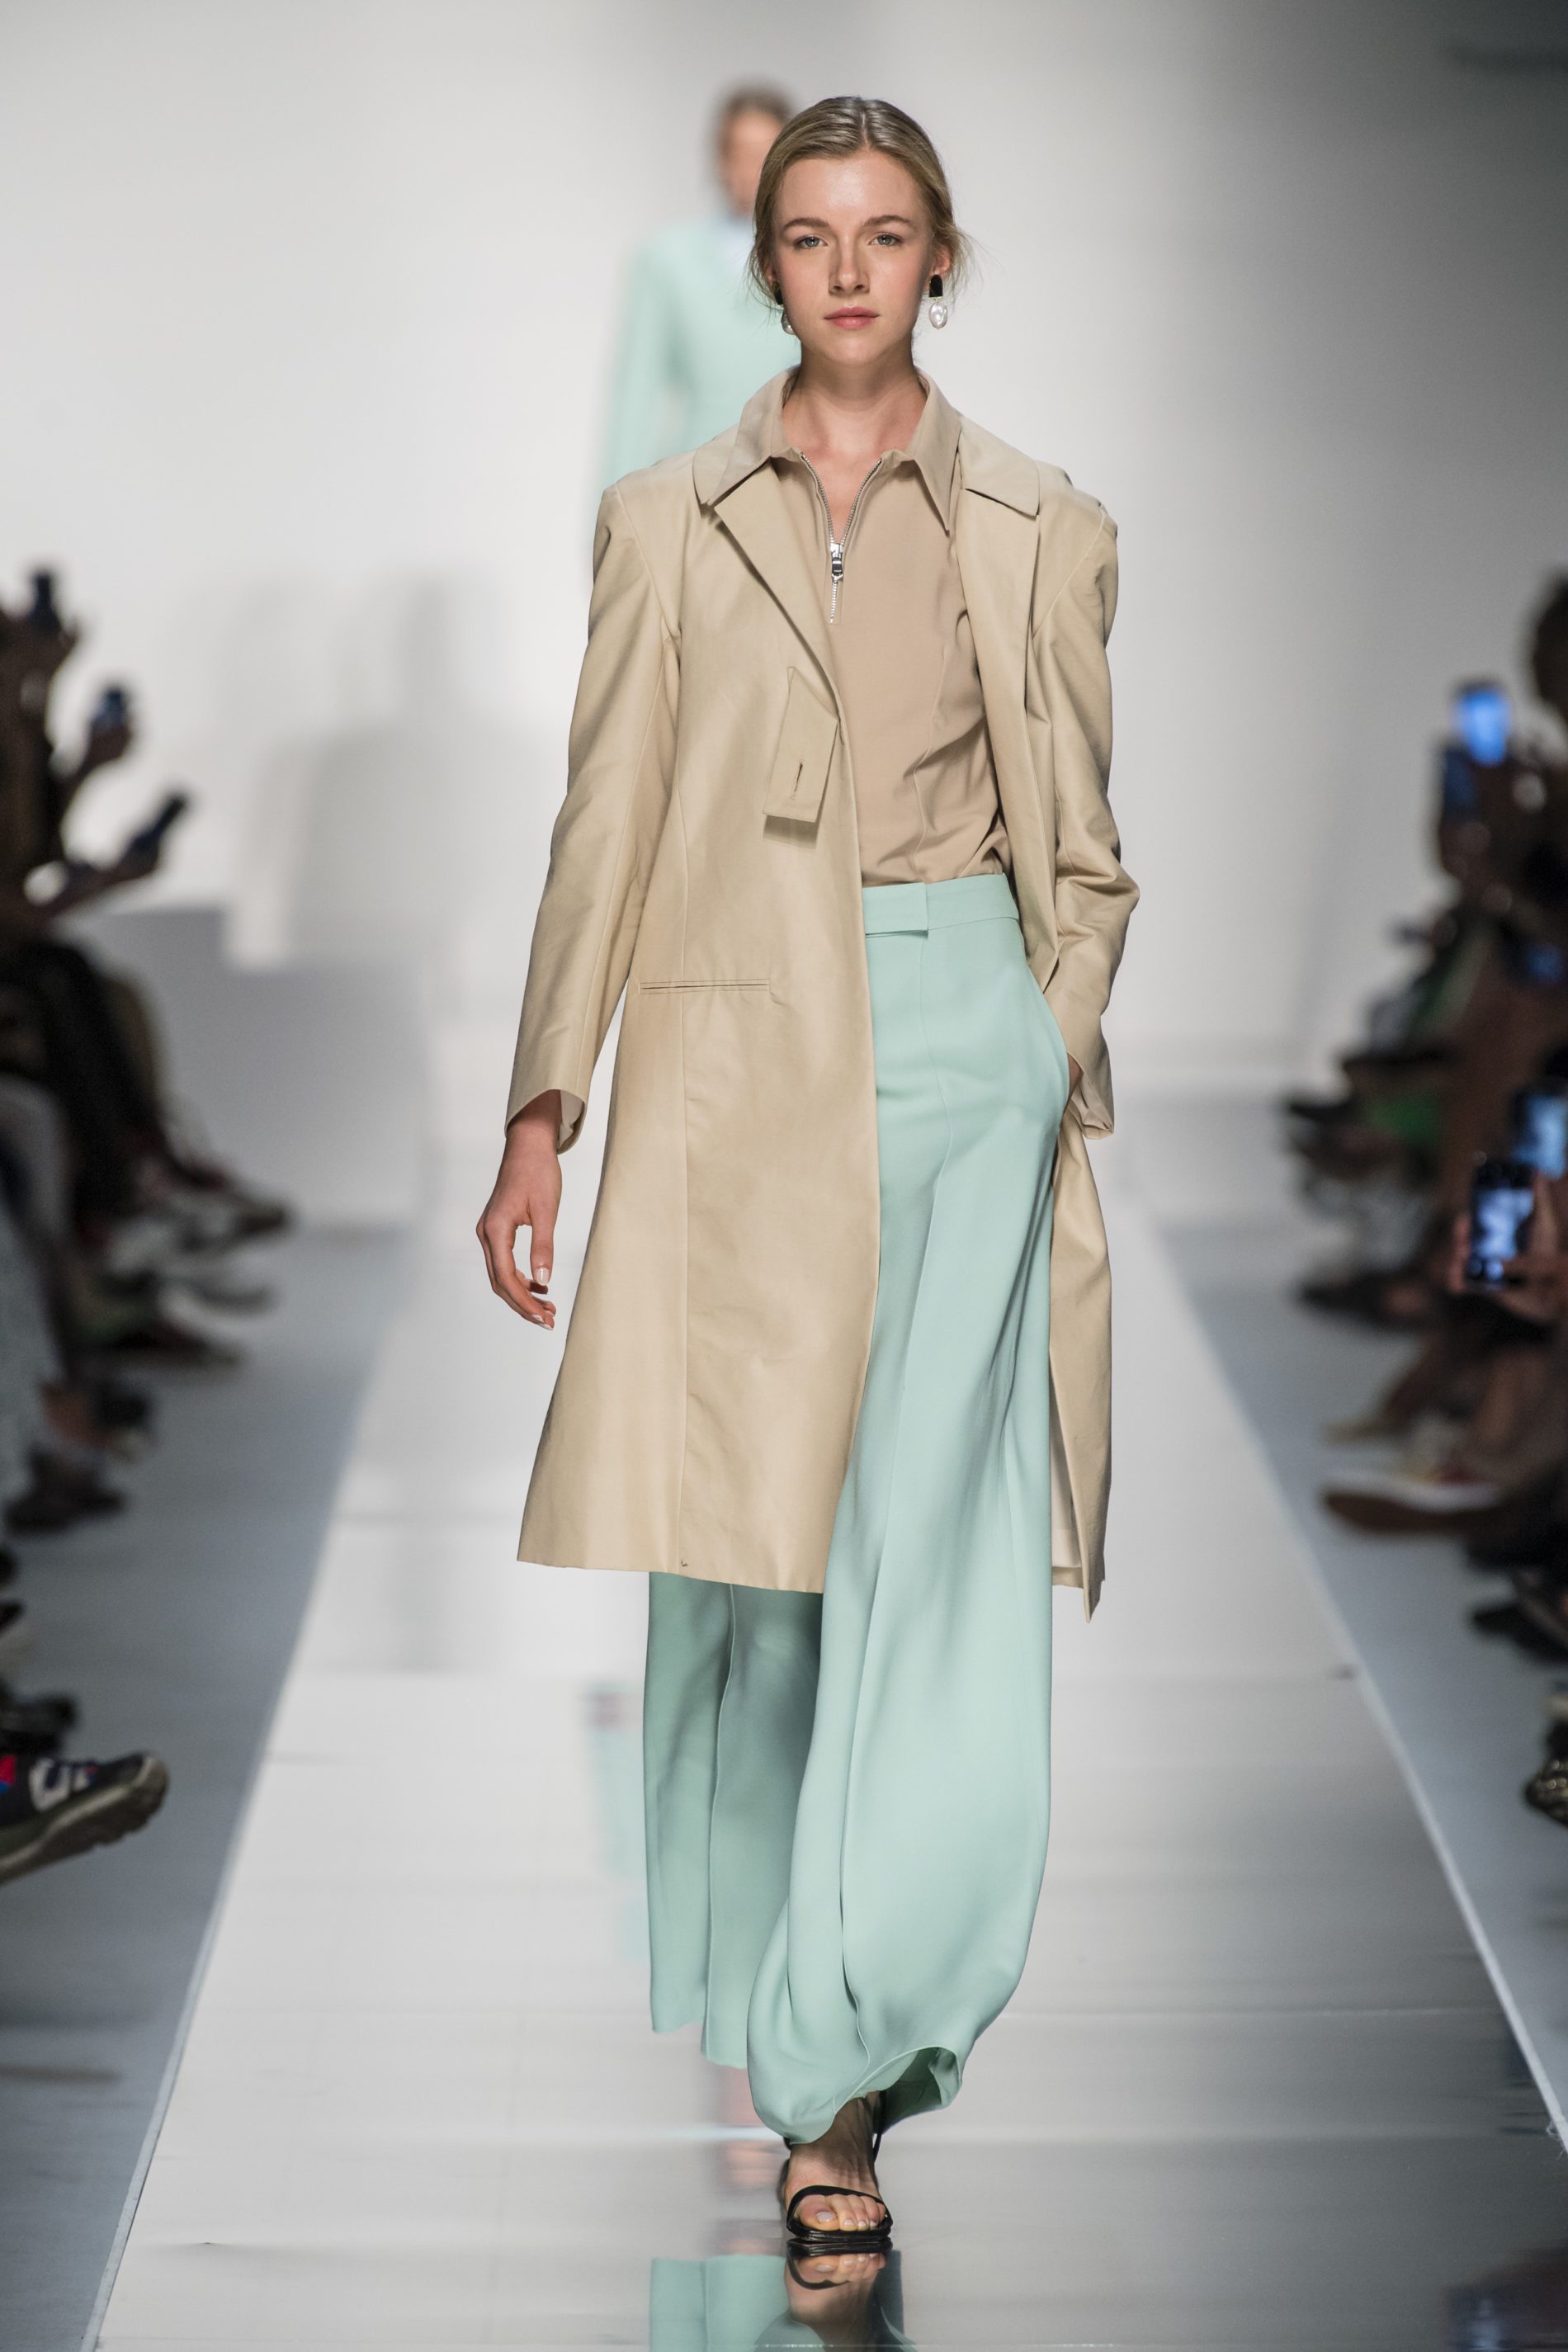 NYNNE SS20 Collection - The Garnette Report